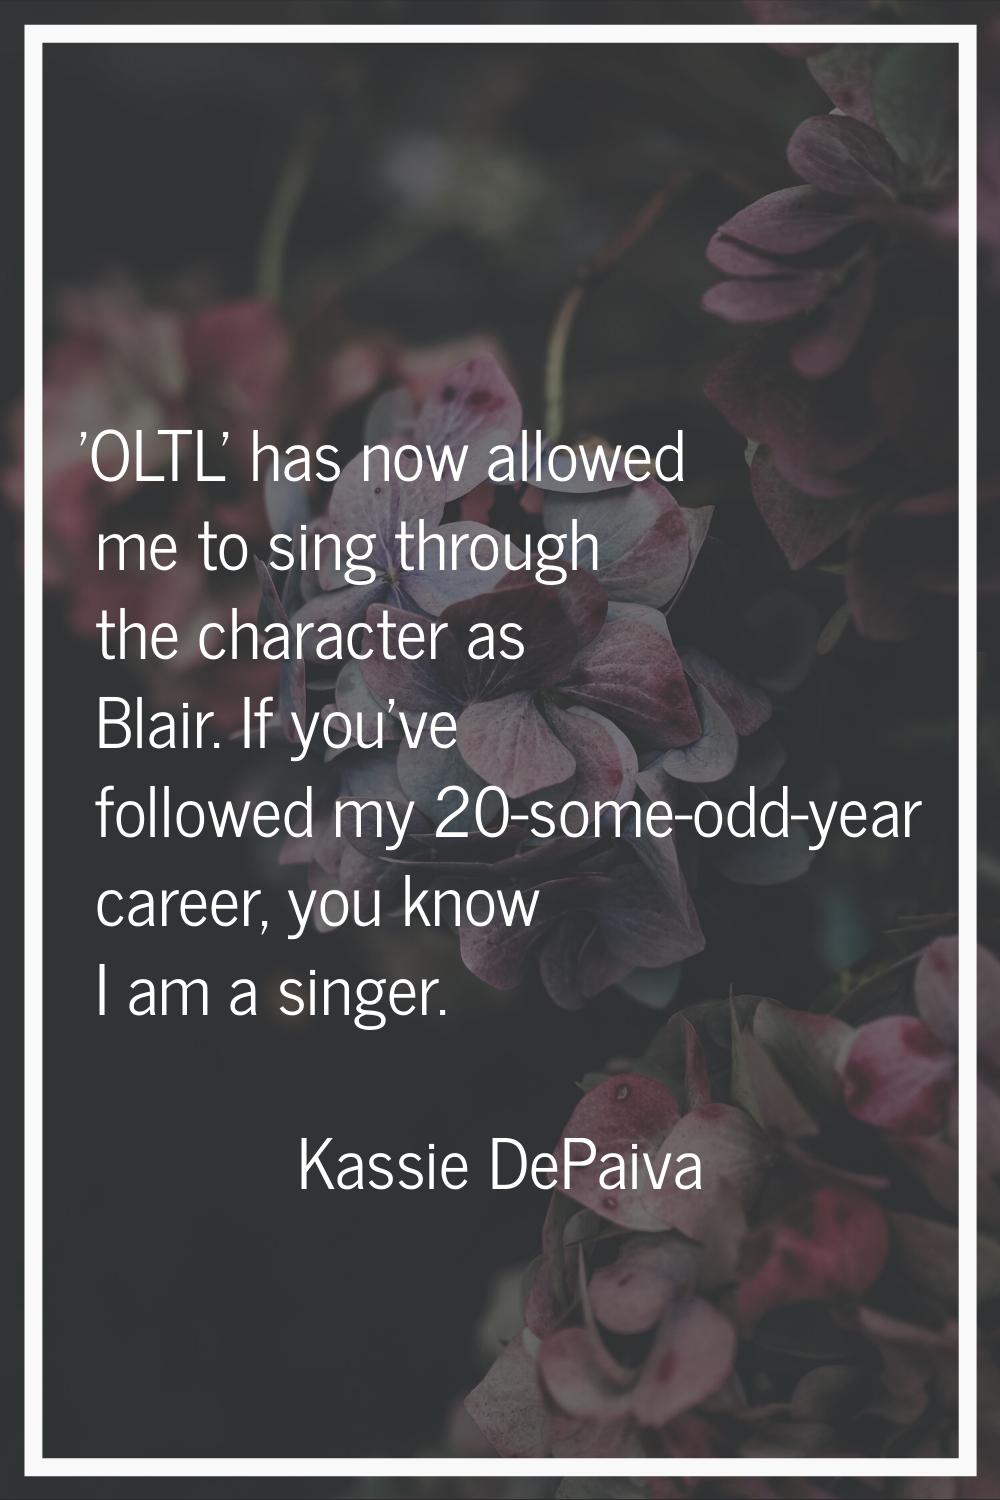 'OLTL' has now allowed me to sing through the character as Blair. If you've followed my 20-some-odd